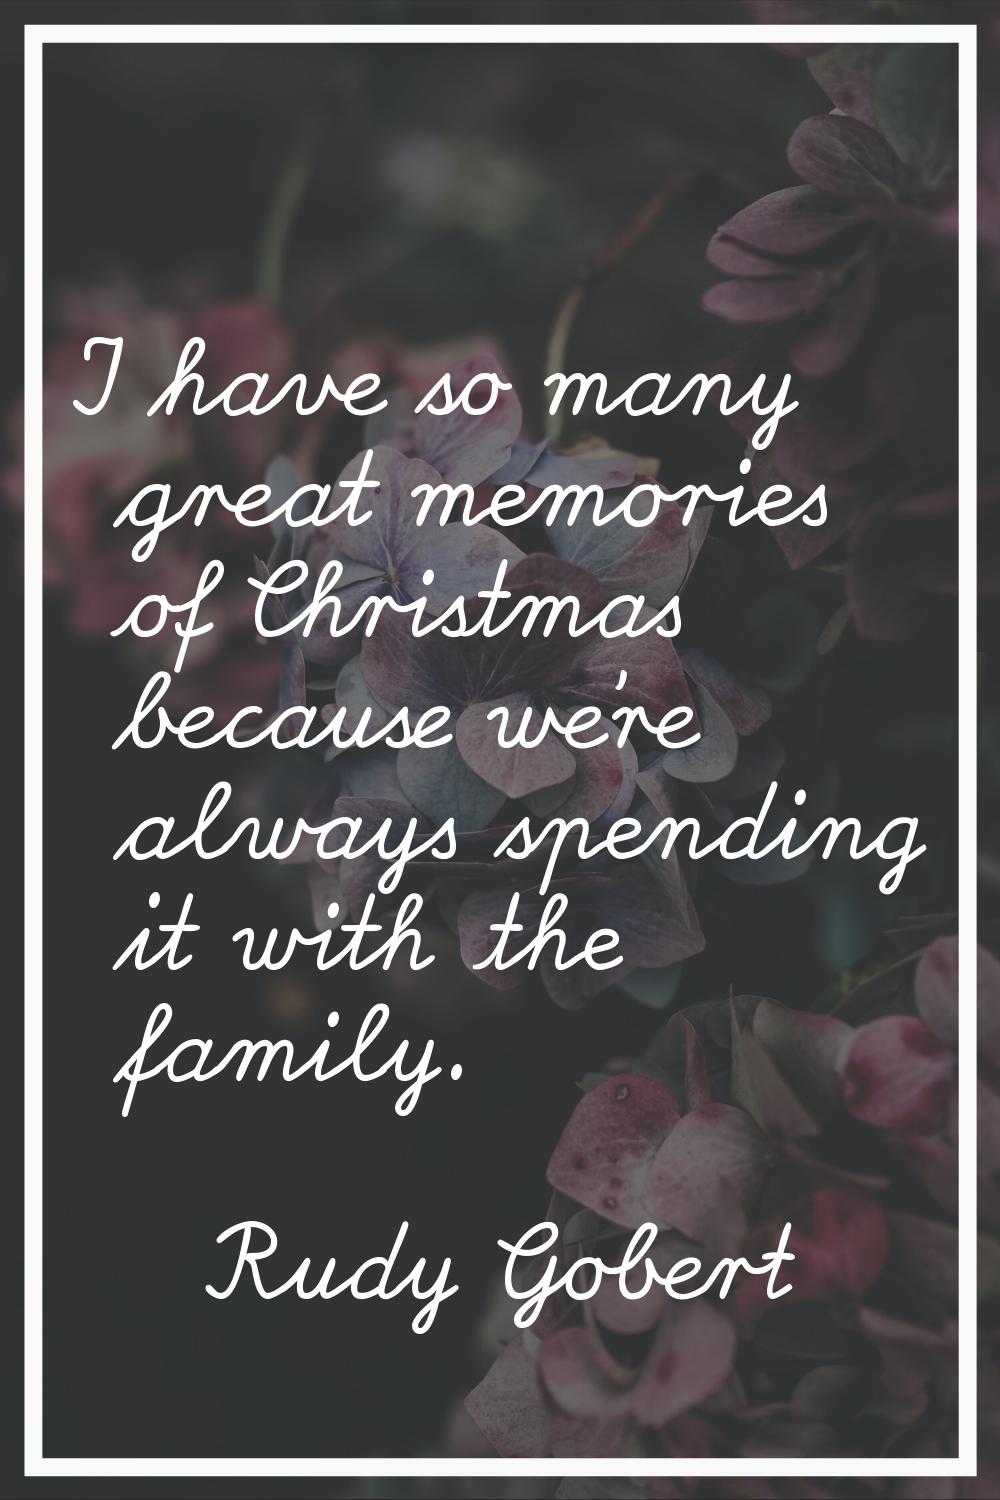 I have so many great memories of Christmas because we're always spending it with the family.